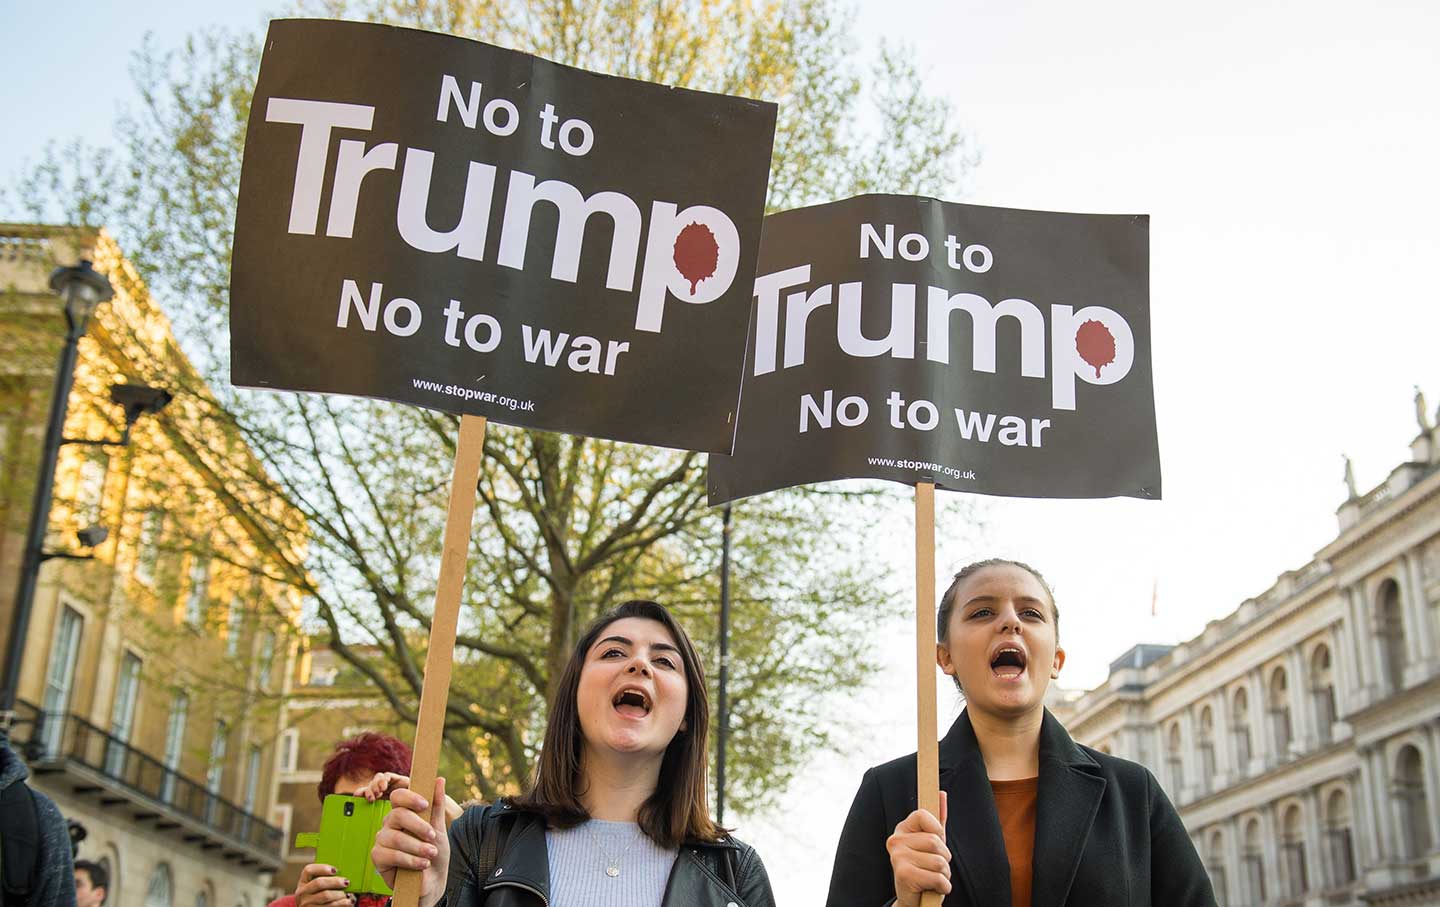 Syria demonstration. Protestors from the Stop the War Coalition take part in a demonstration outside Downing Street, in Westminster, London on Friday, April 7, 2017.